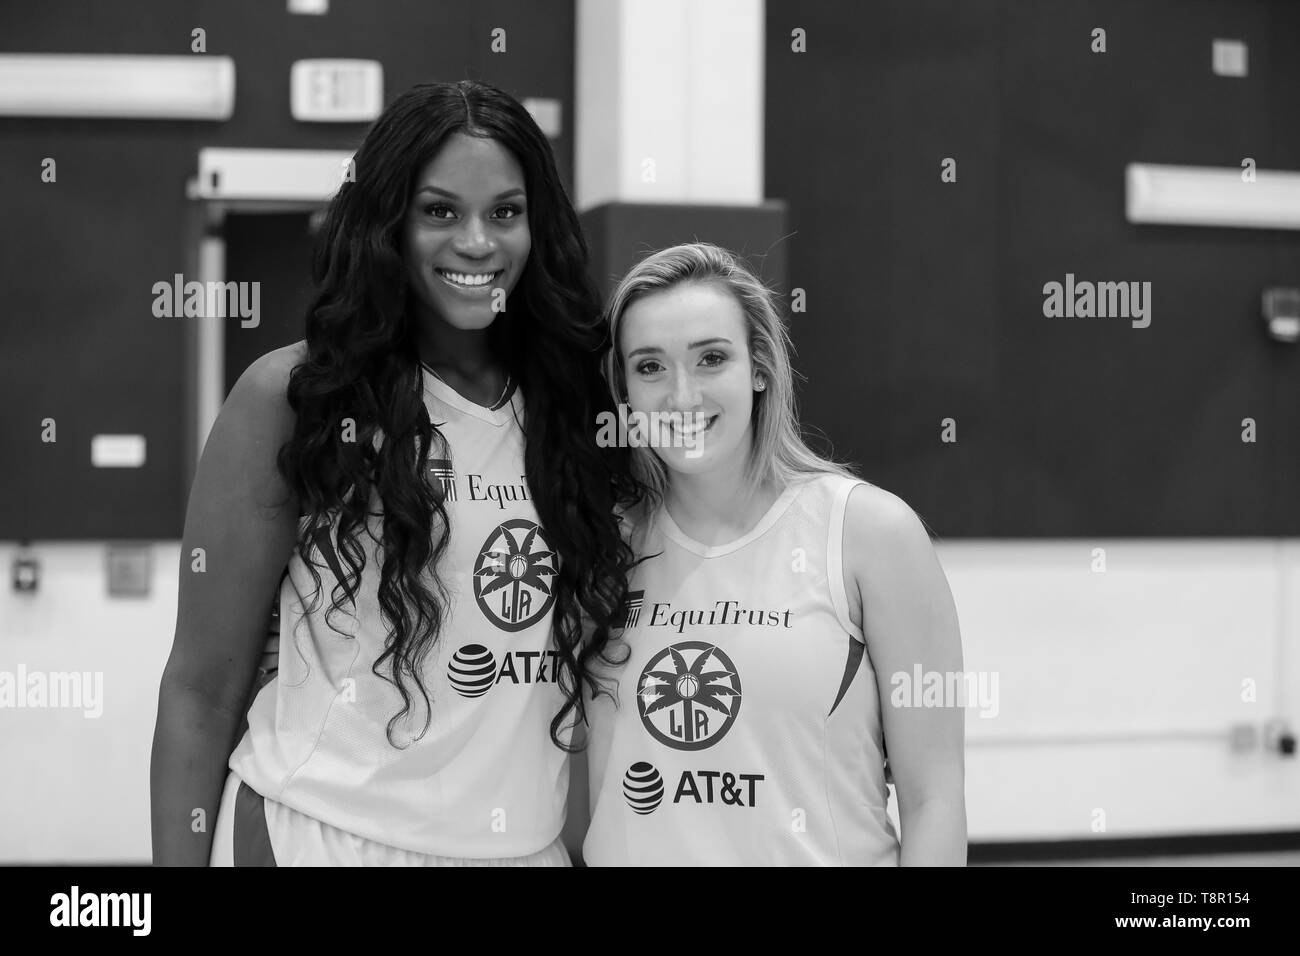 WNBA 2019: Rookies Los Angeles Sparks center Kalani Brown #21 and Los Angeles Sparks guard Marina Mabrey #5 during Los Angeles Sparks Media Day May 14, 2019 at Los Angeles Southwest College. (Photo by Jevone Moore) Stock Photo